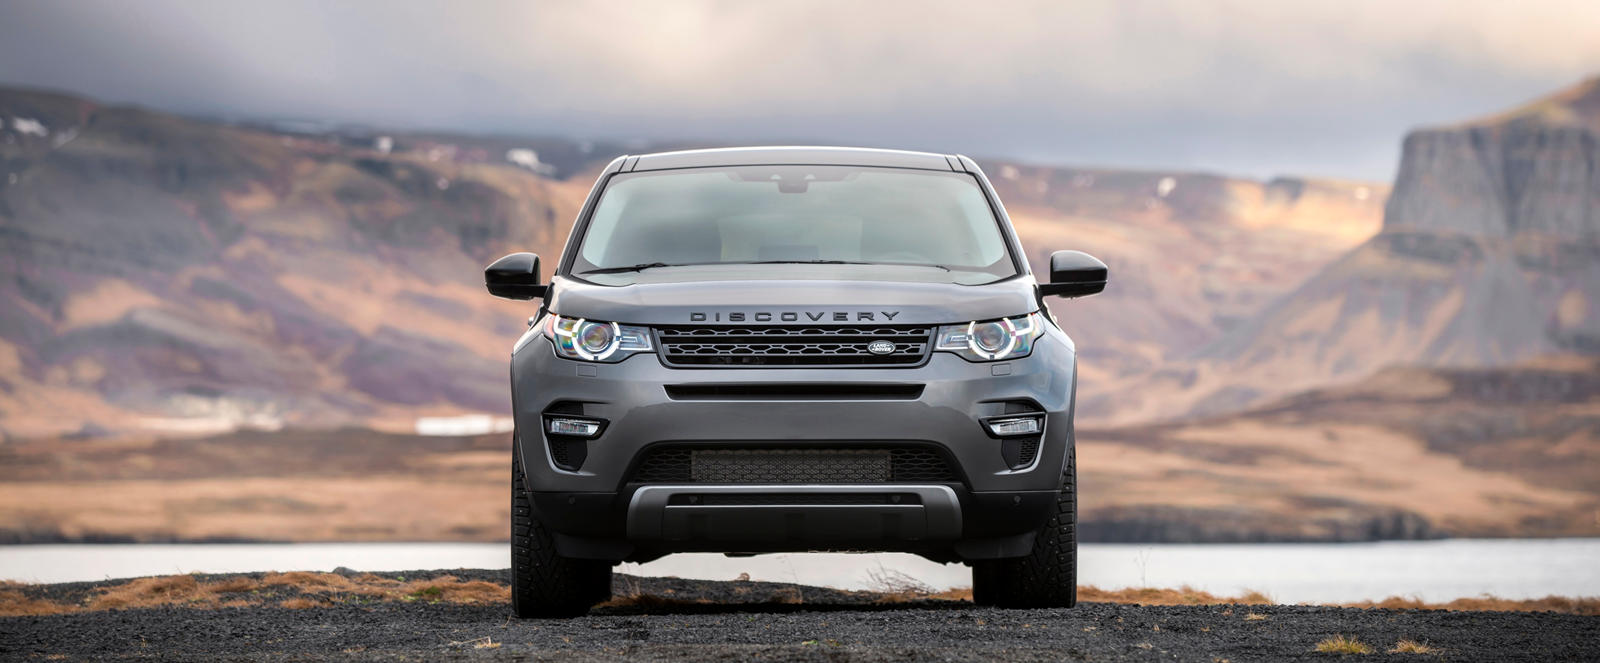 2015 Land Rover Discovery Sport Front View